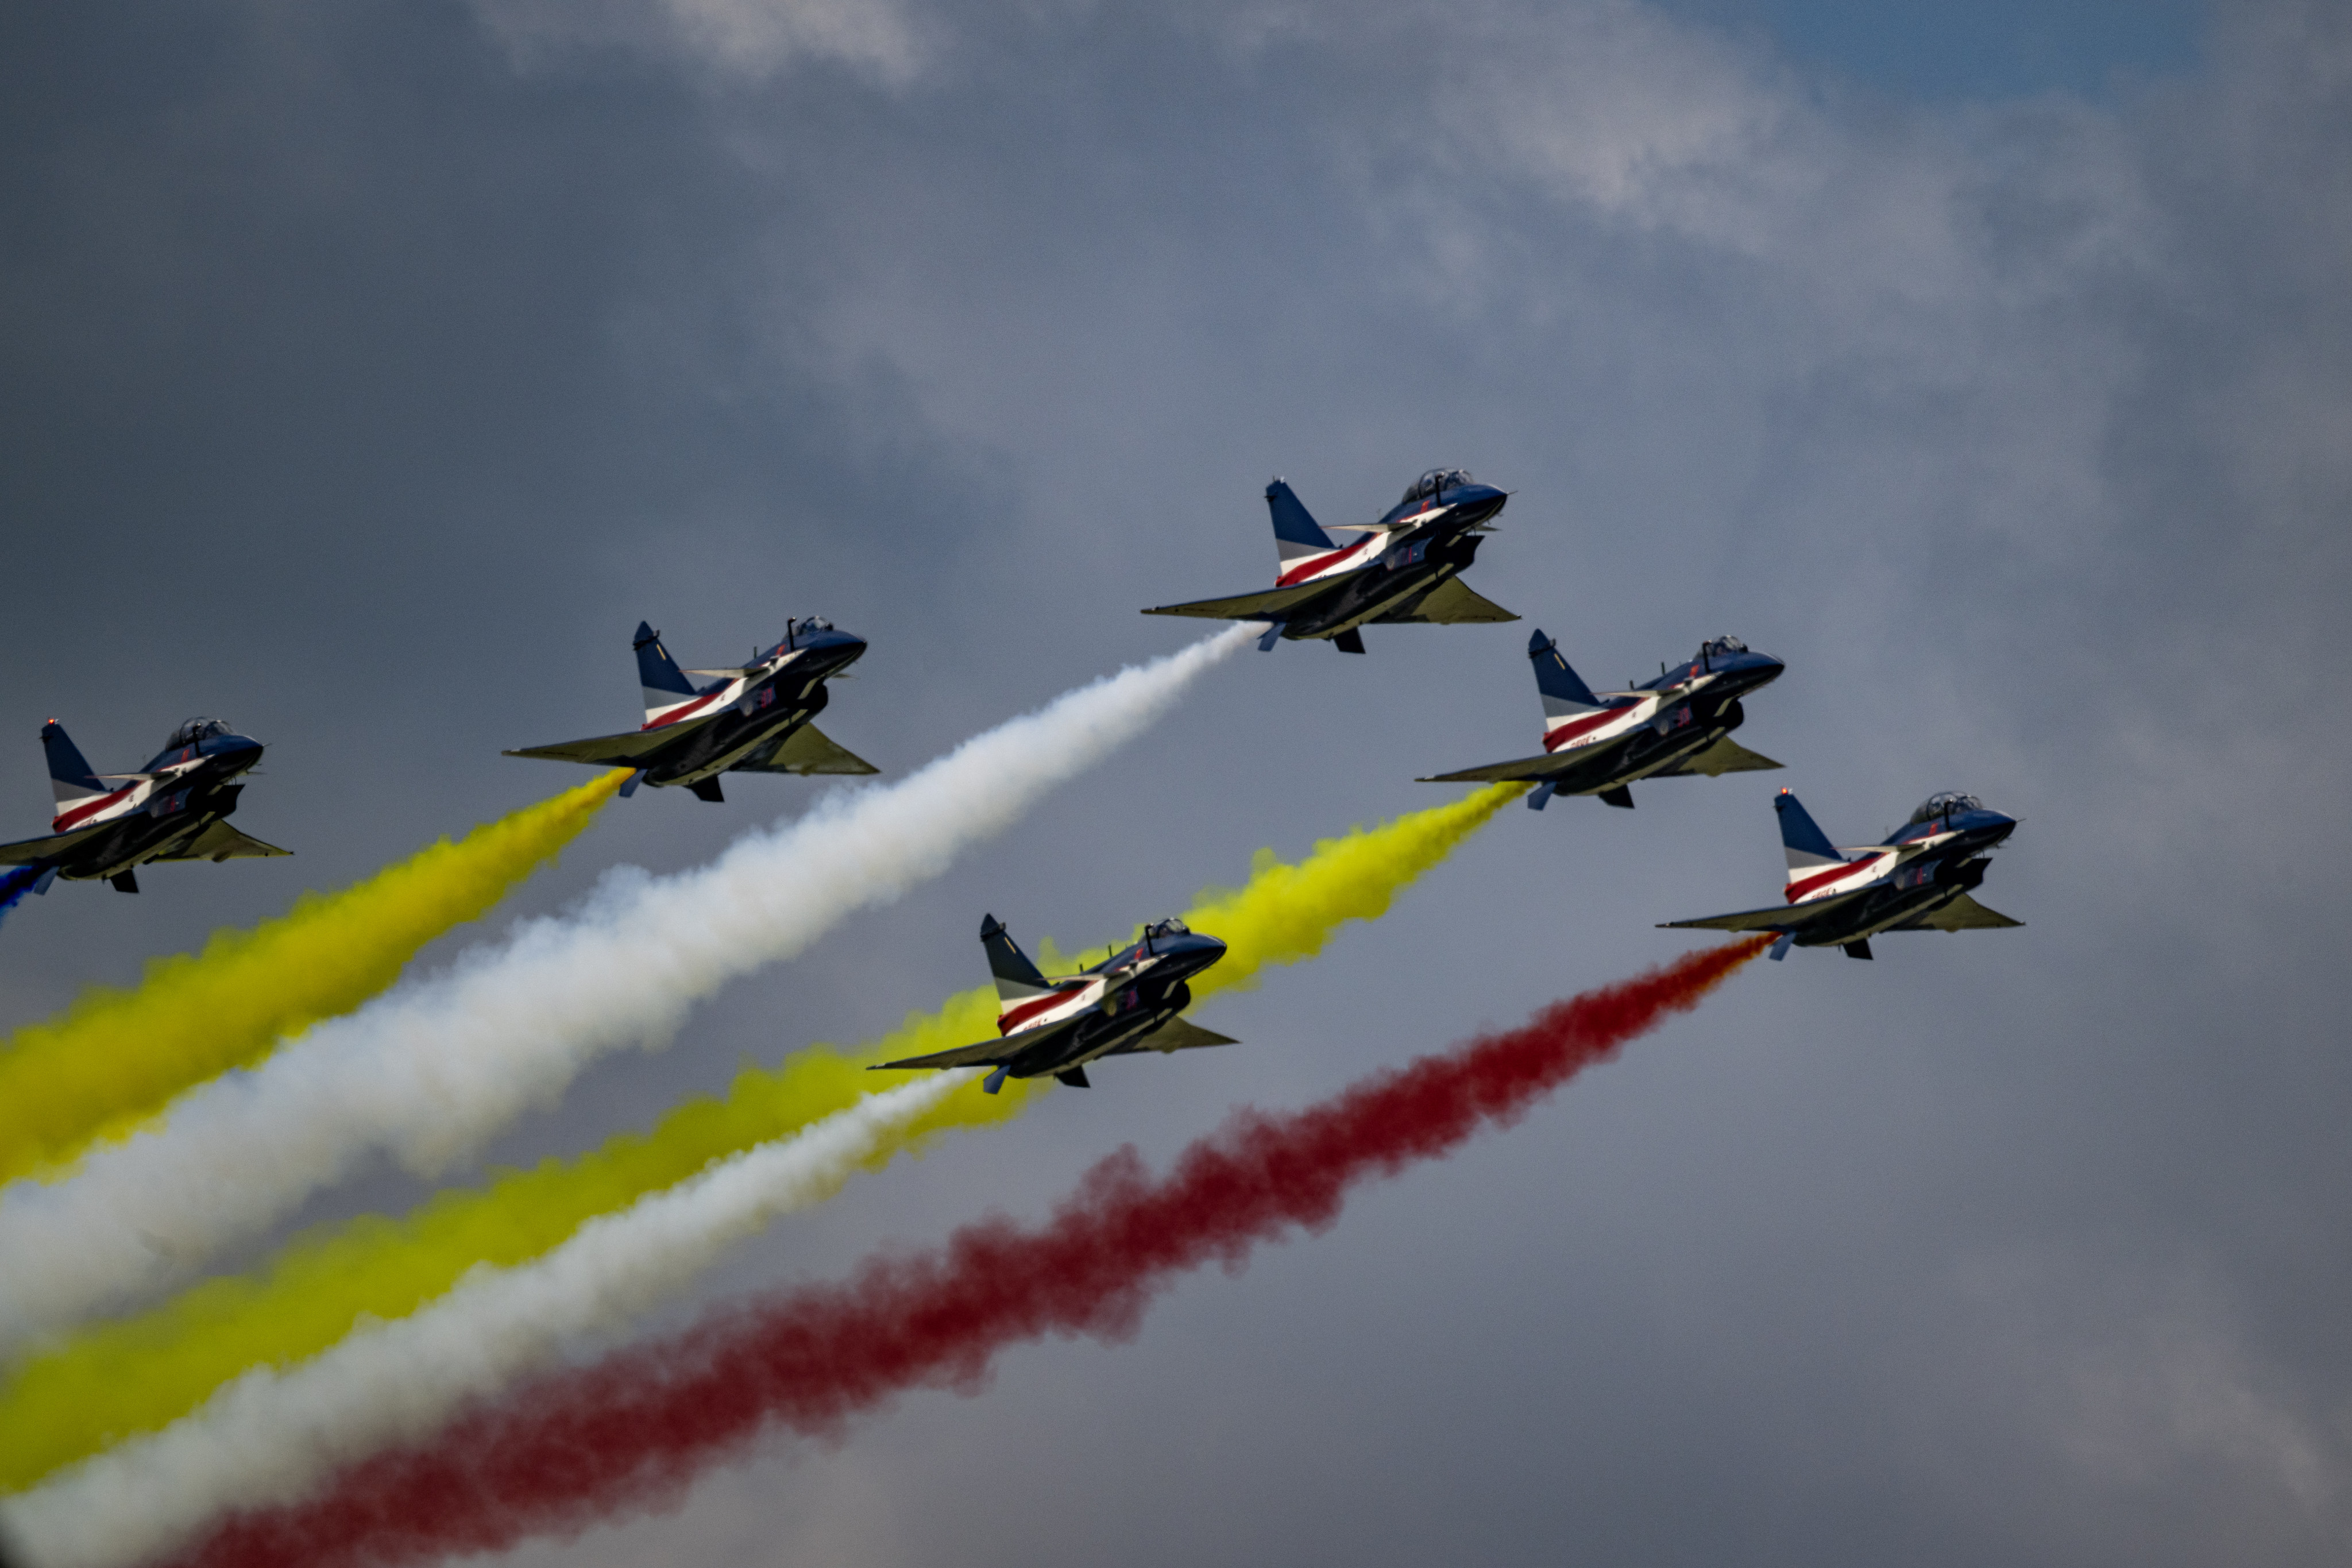 Members of China’s August 1st air display team will be appearing at the Dubai Airshow. Photo: Getty Images